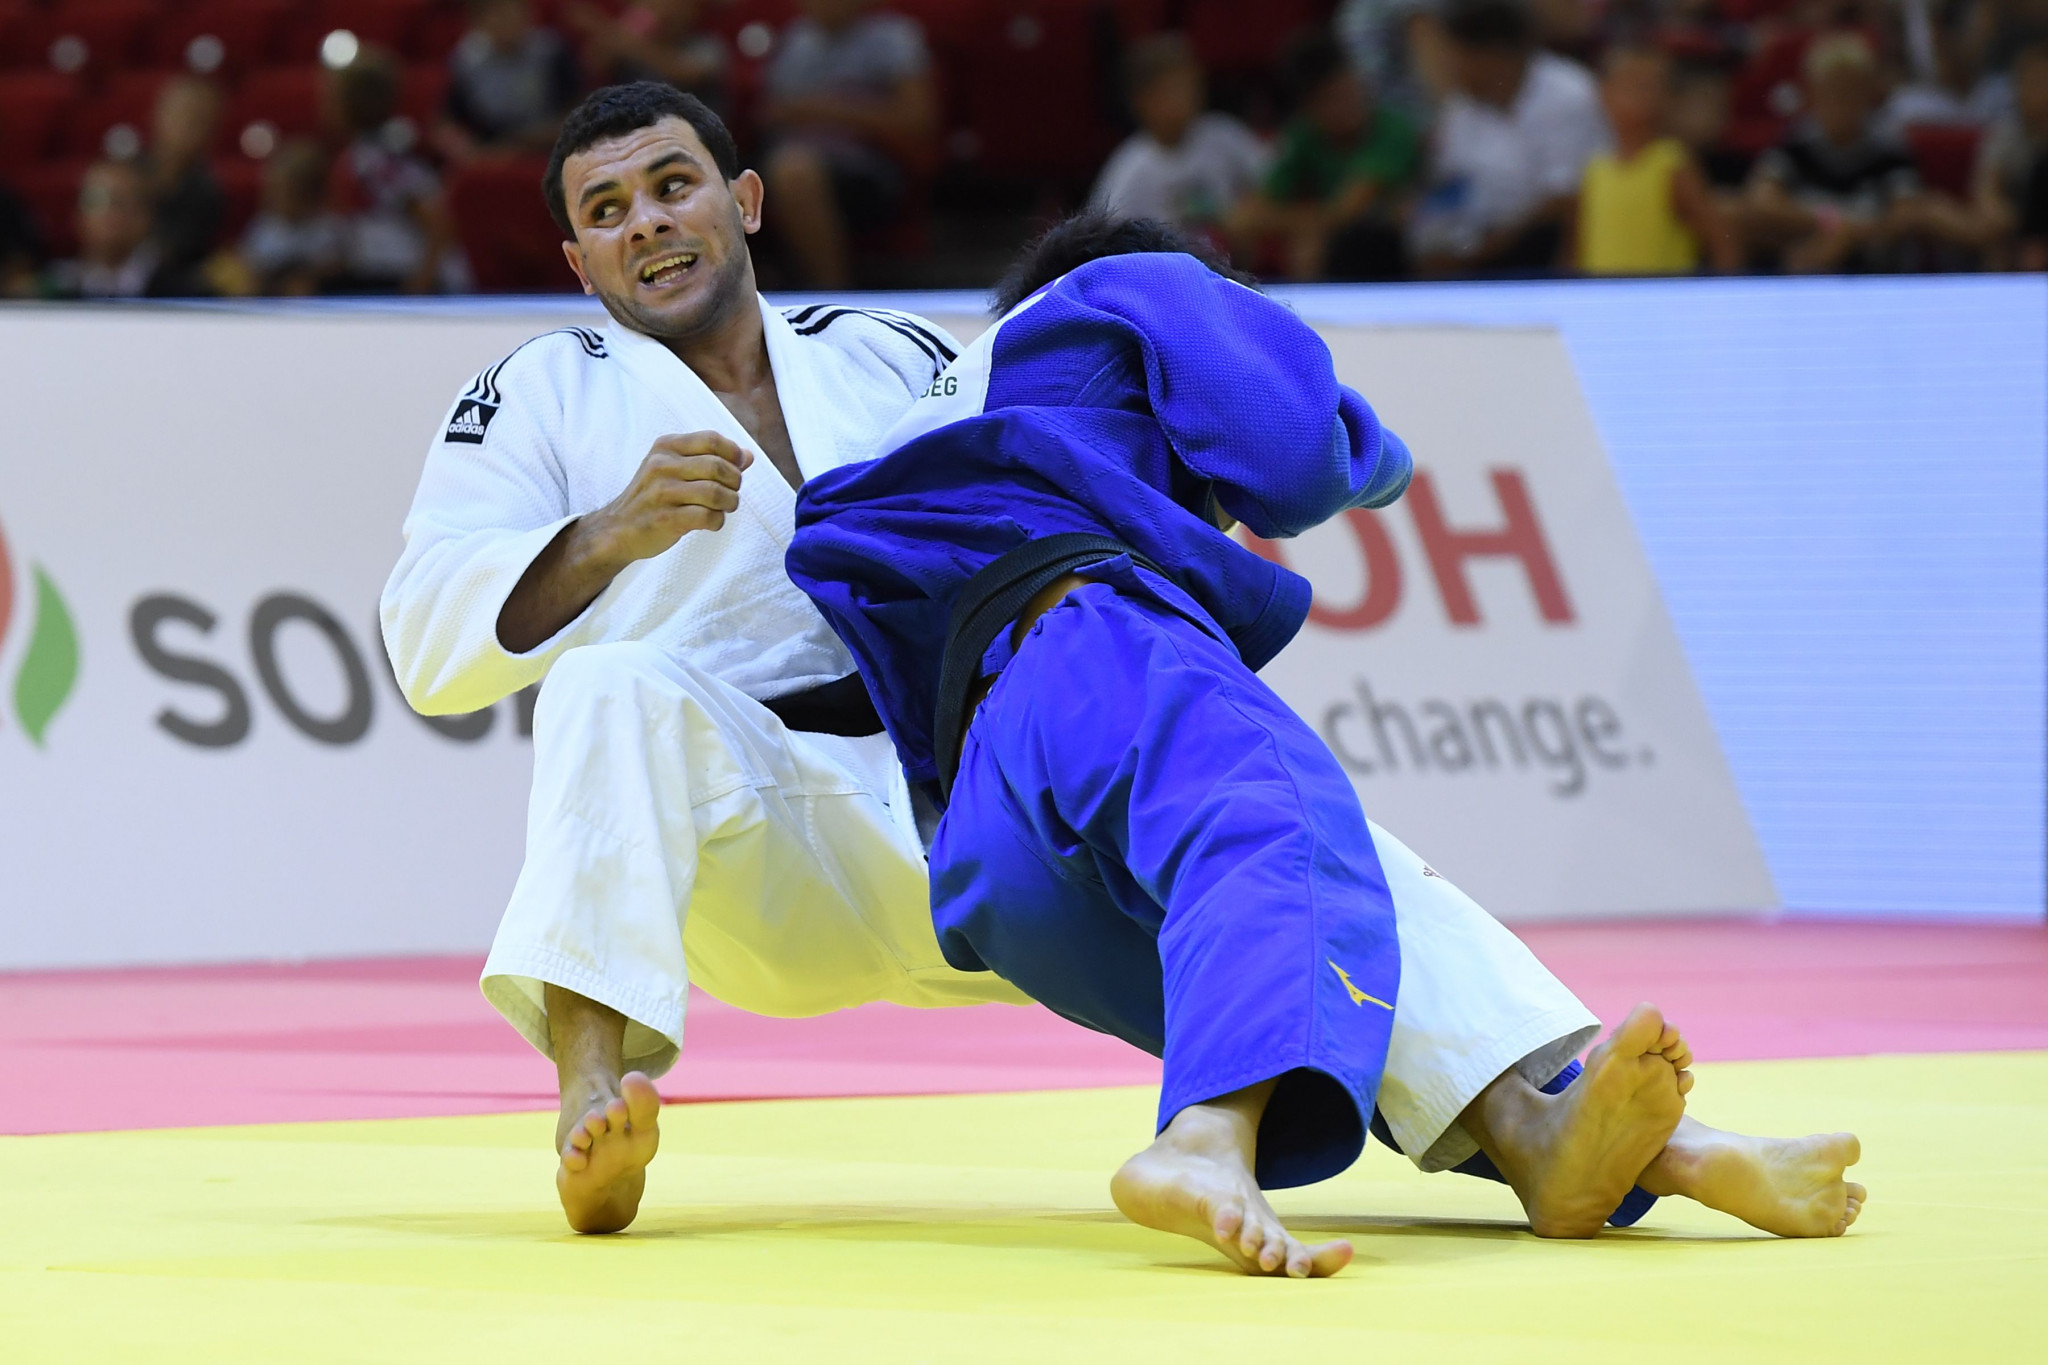 Egypt's Mohamed Abdelmawgoud came out on top in the men's under-66kg category ©Getty Images